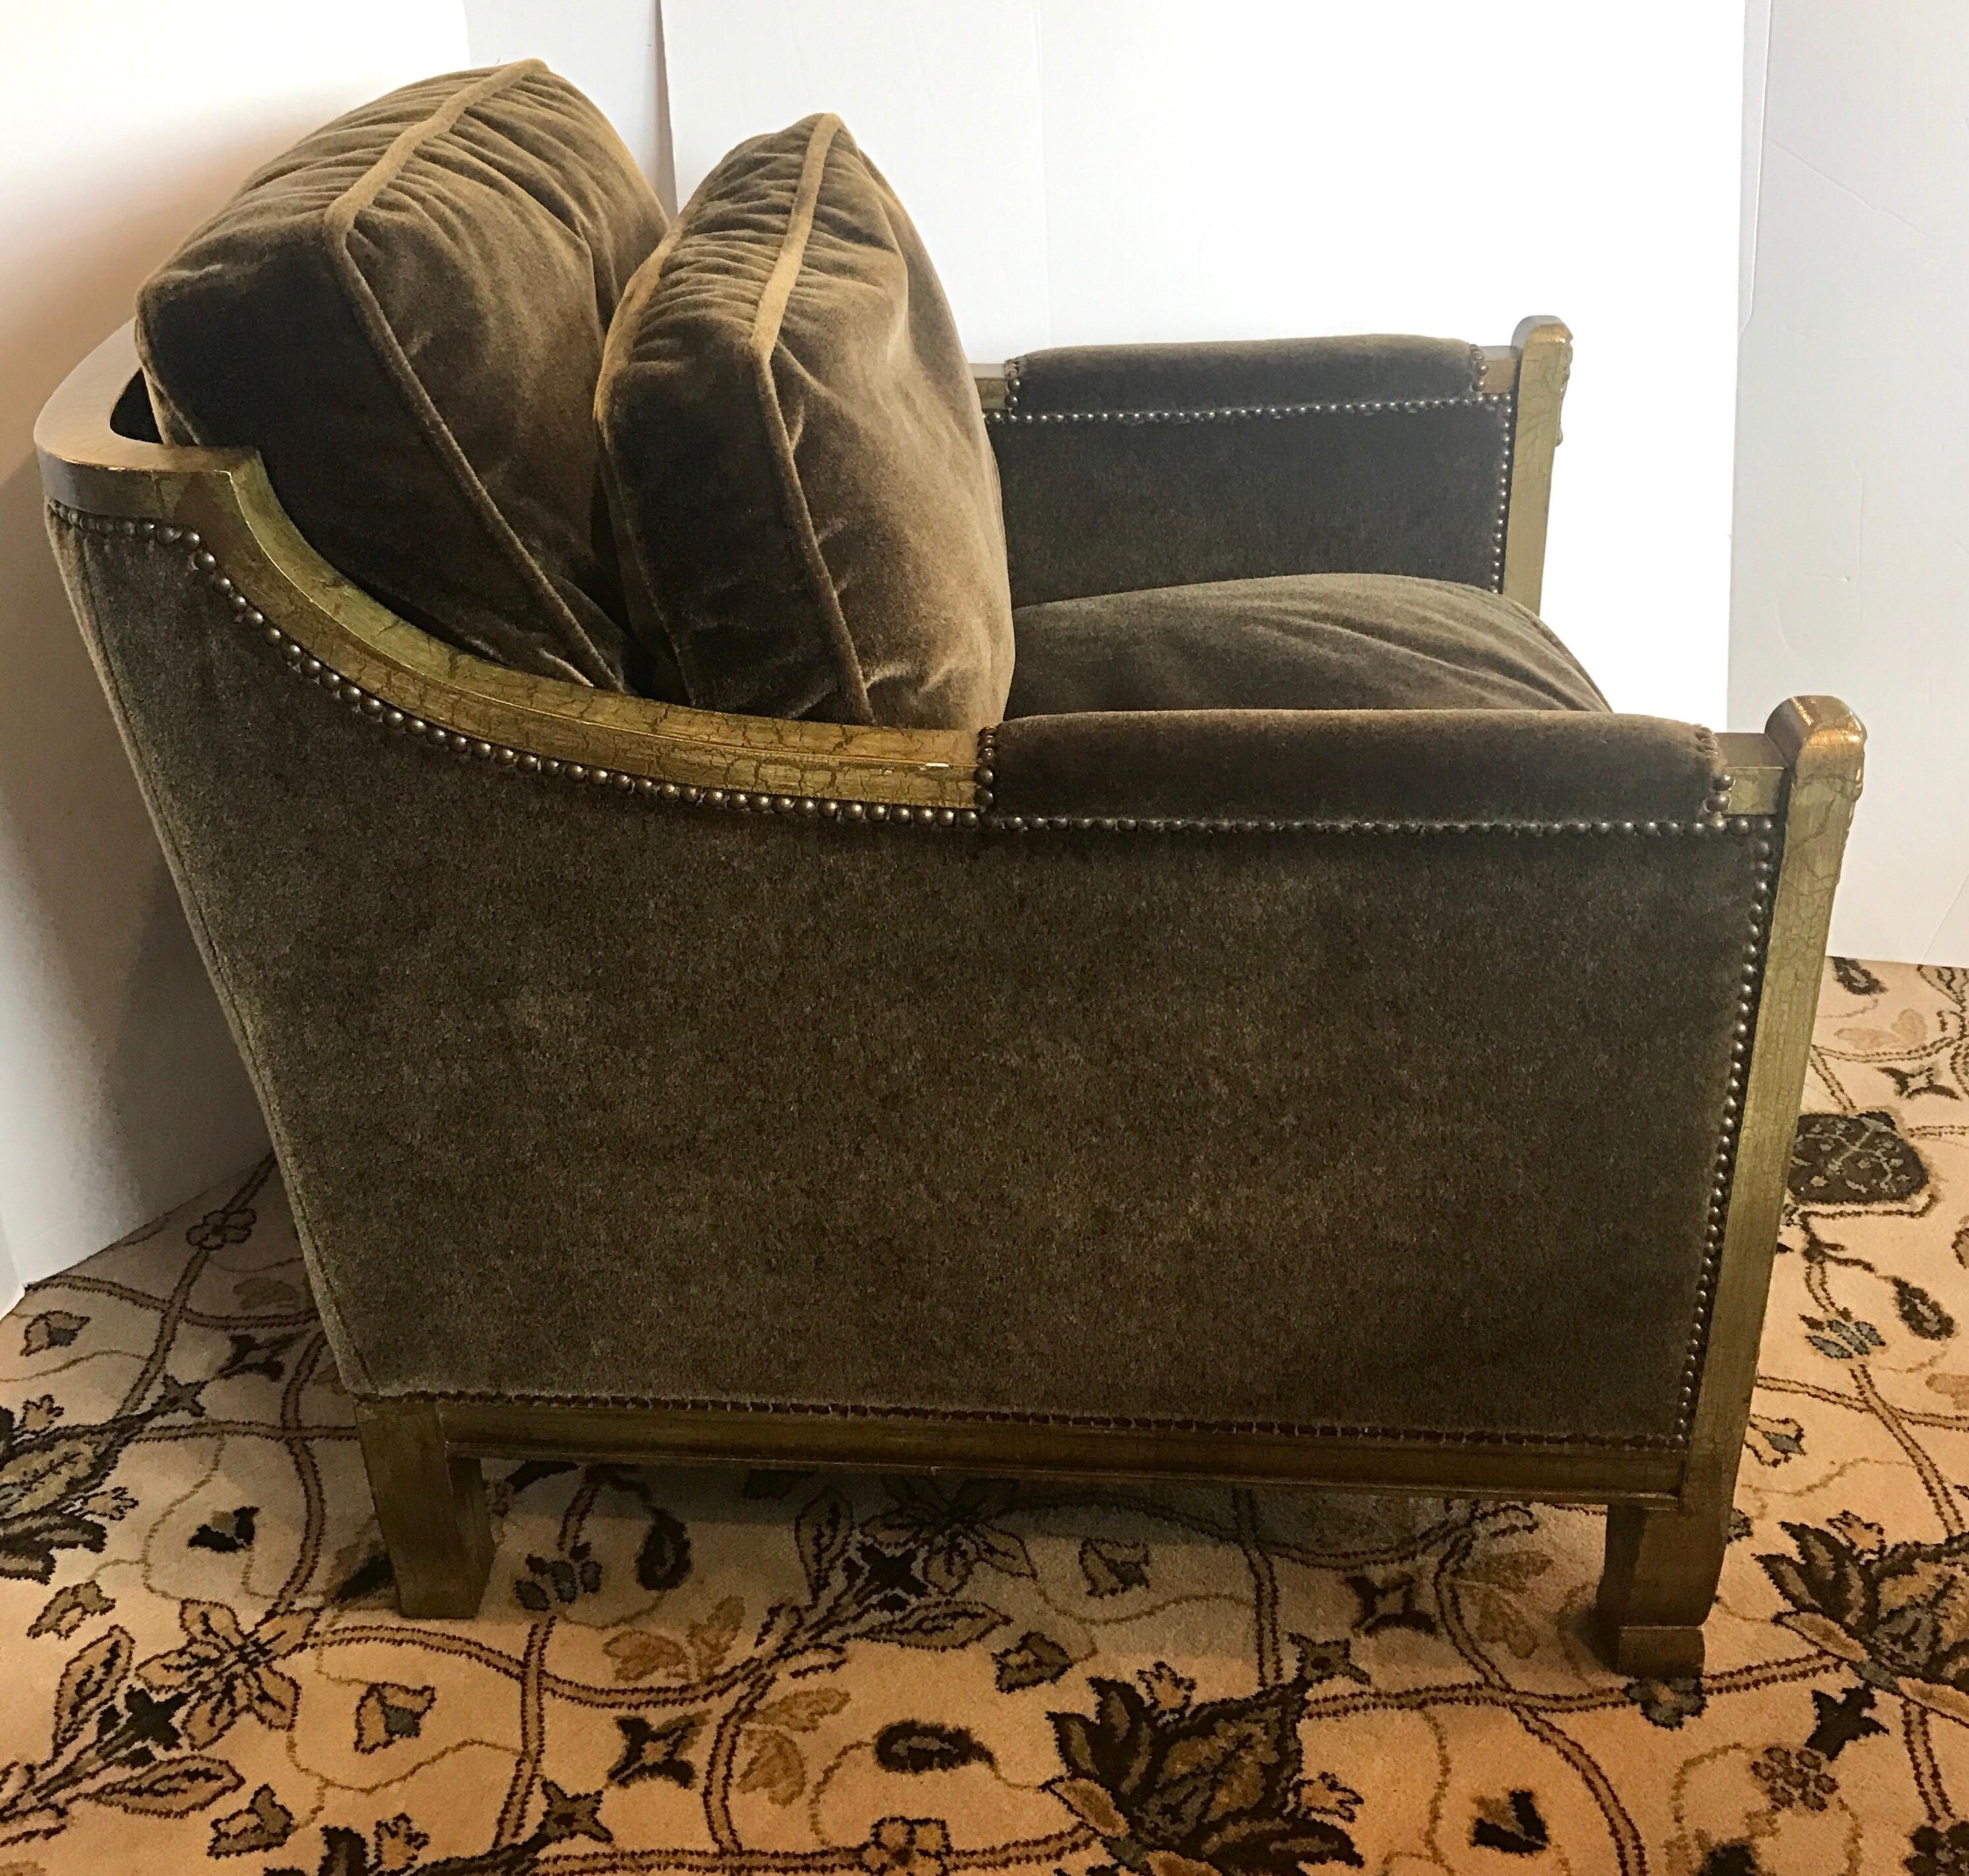 Pair of chic neoclassical style club chairs with a carved wood frame in a distressed gold finish and upholstered in a luxurious mohair velvet in an olive green color. Trimmed in brass nailheads all around. Very comfortable with three loose down